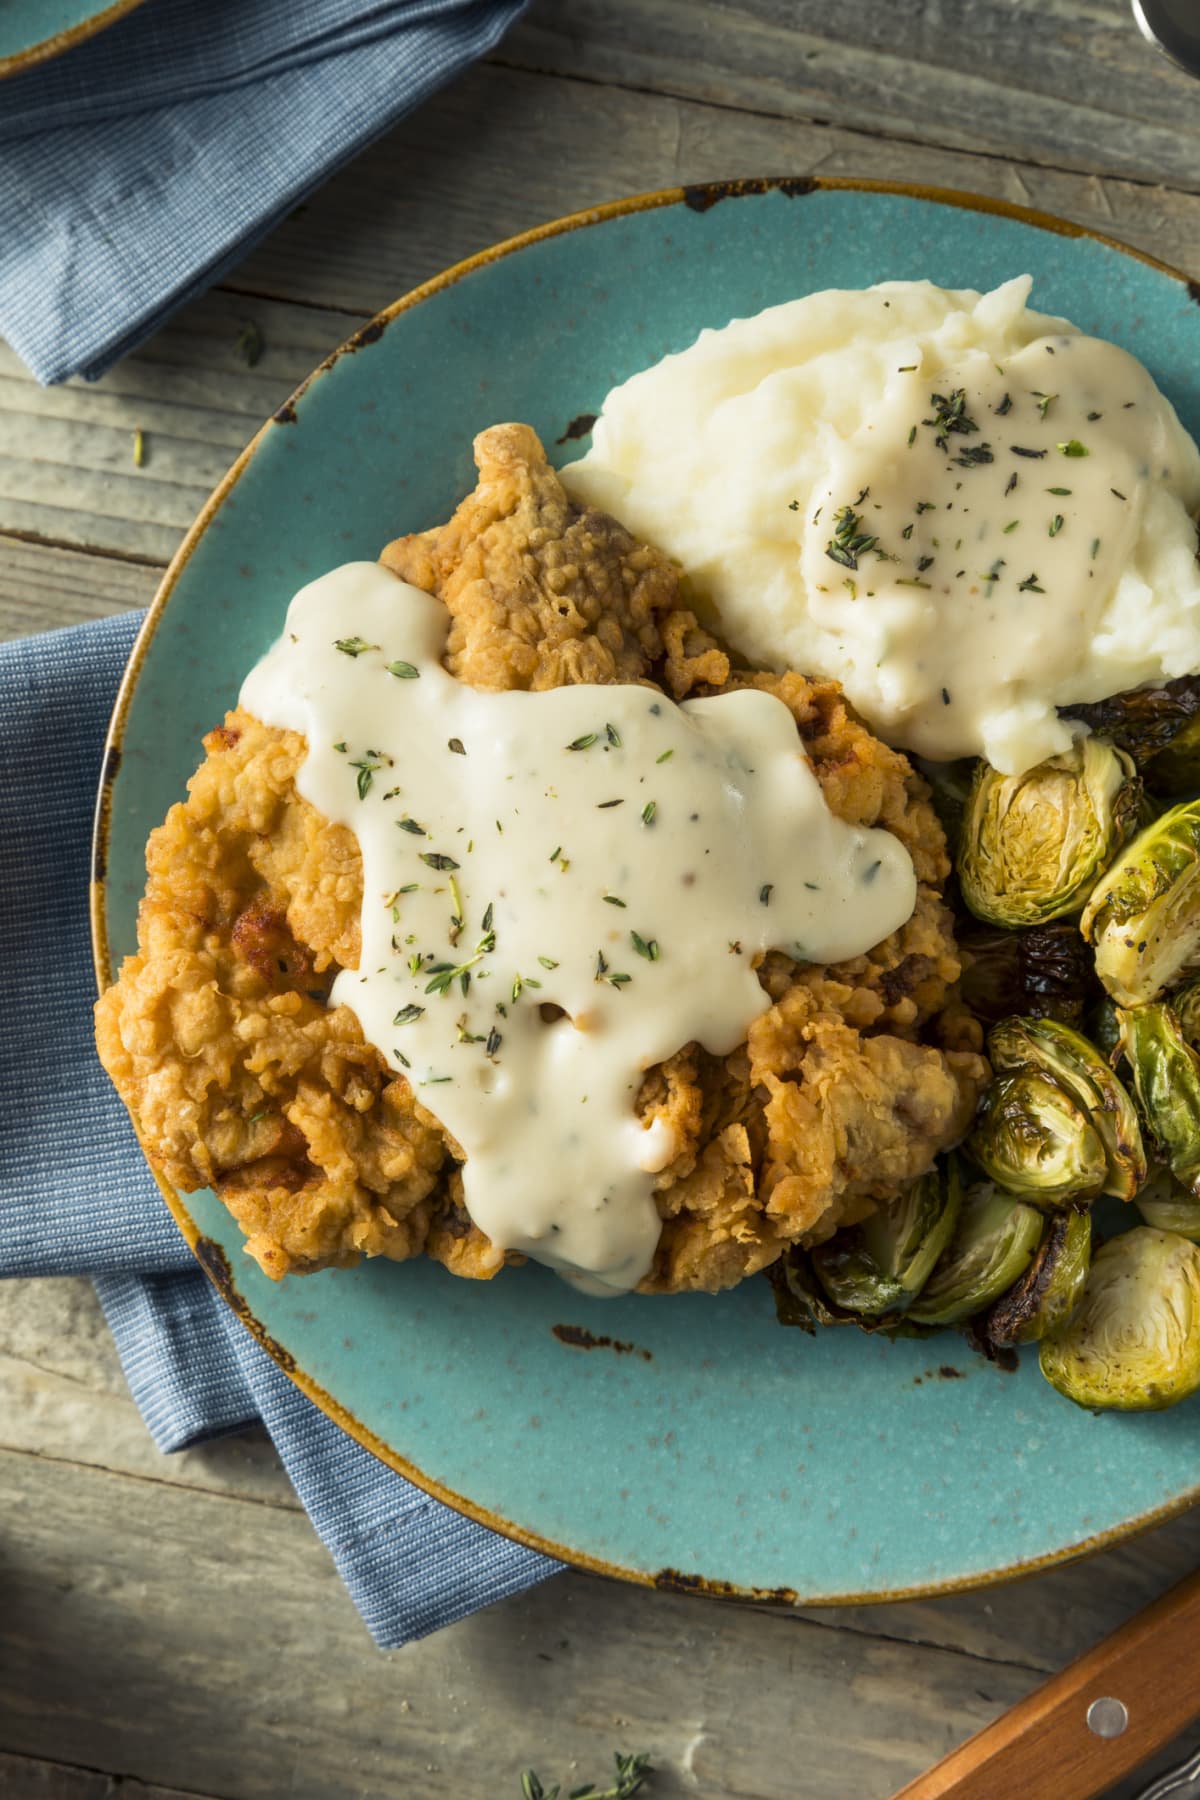 Plate of country fried steak with gravy, mashed potatoes, and Brussels sprouts